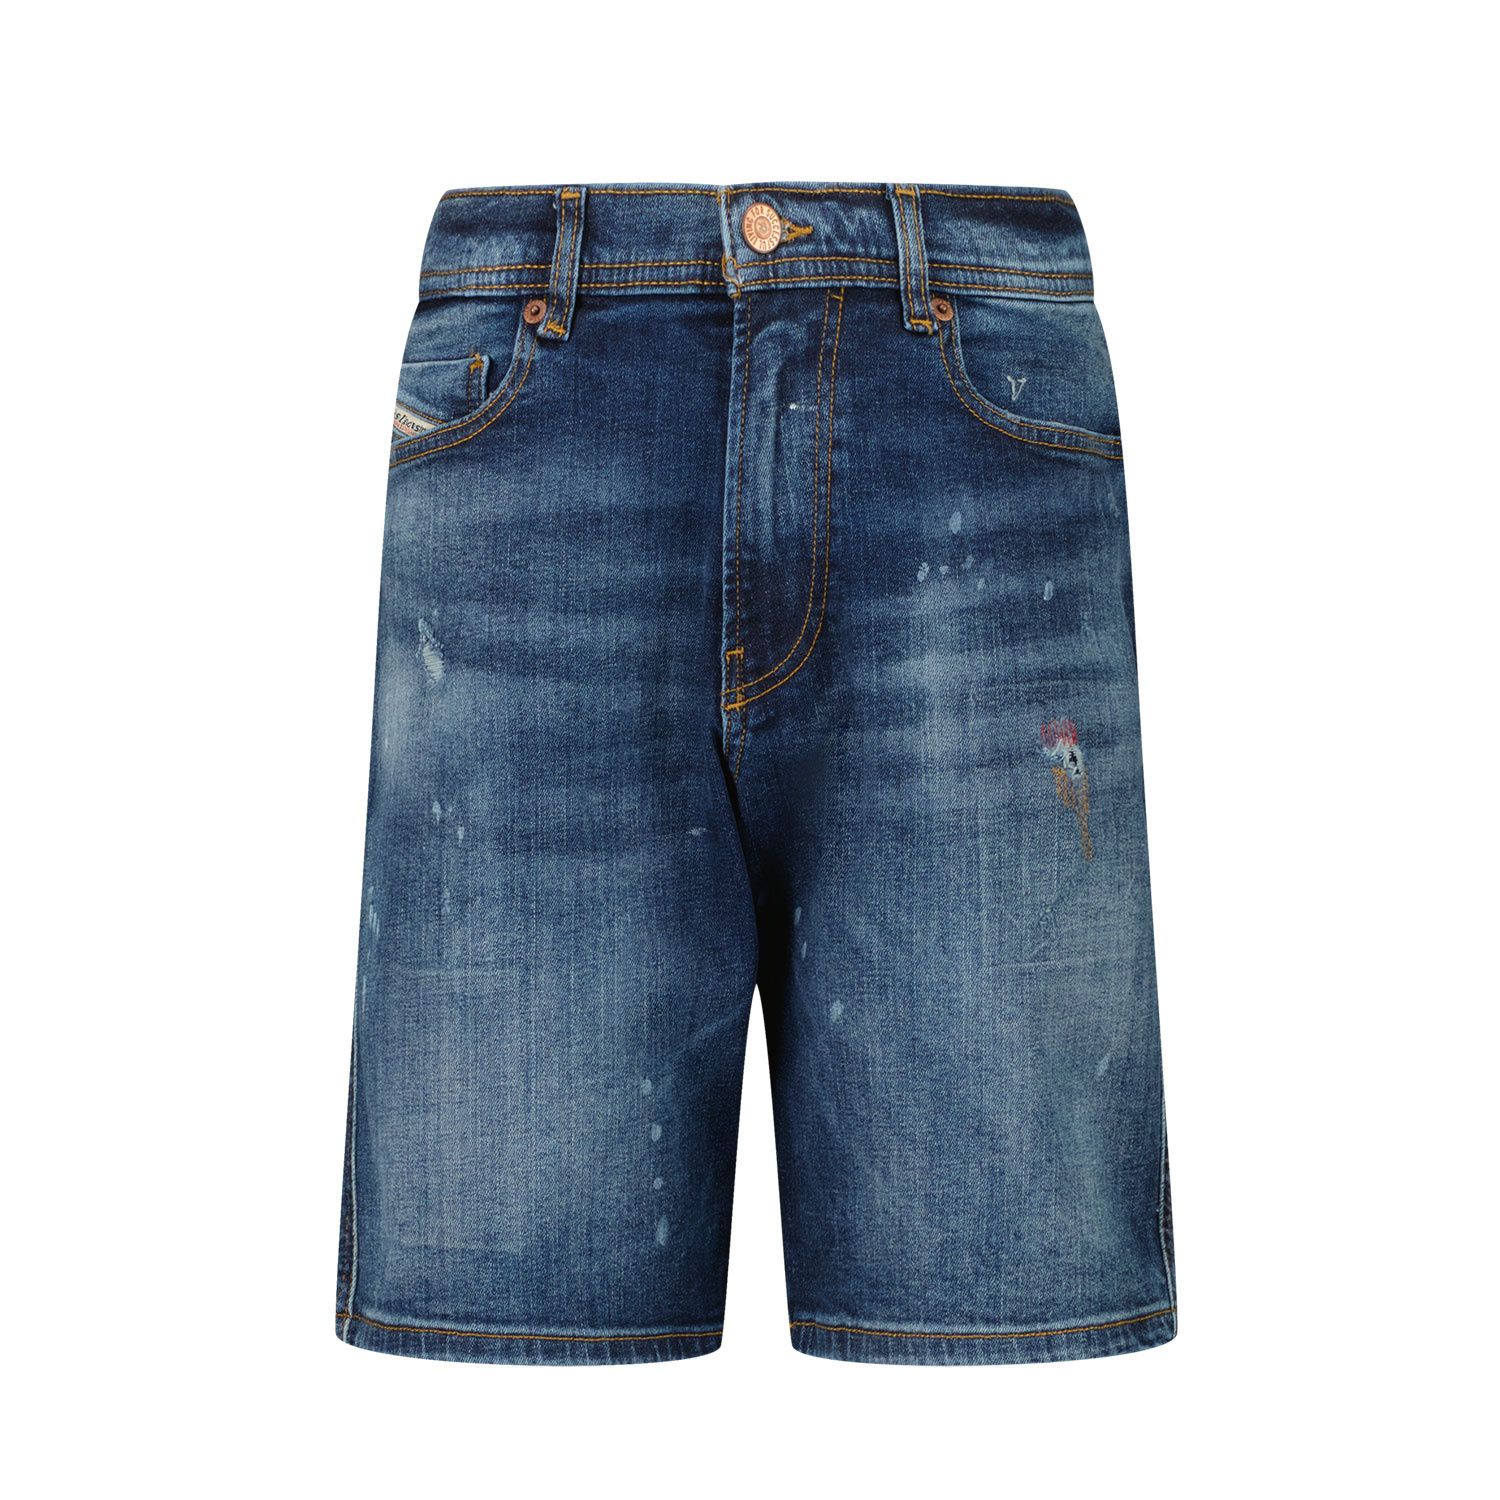 Picture of Diesel J00151 kids shorts jeans